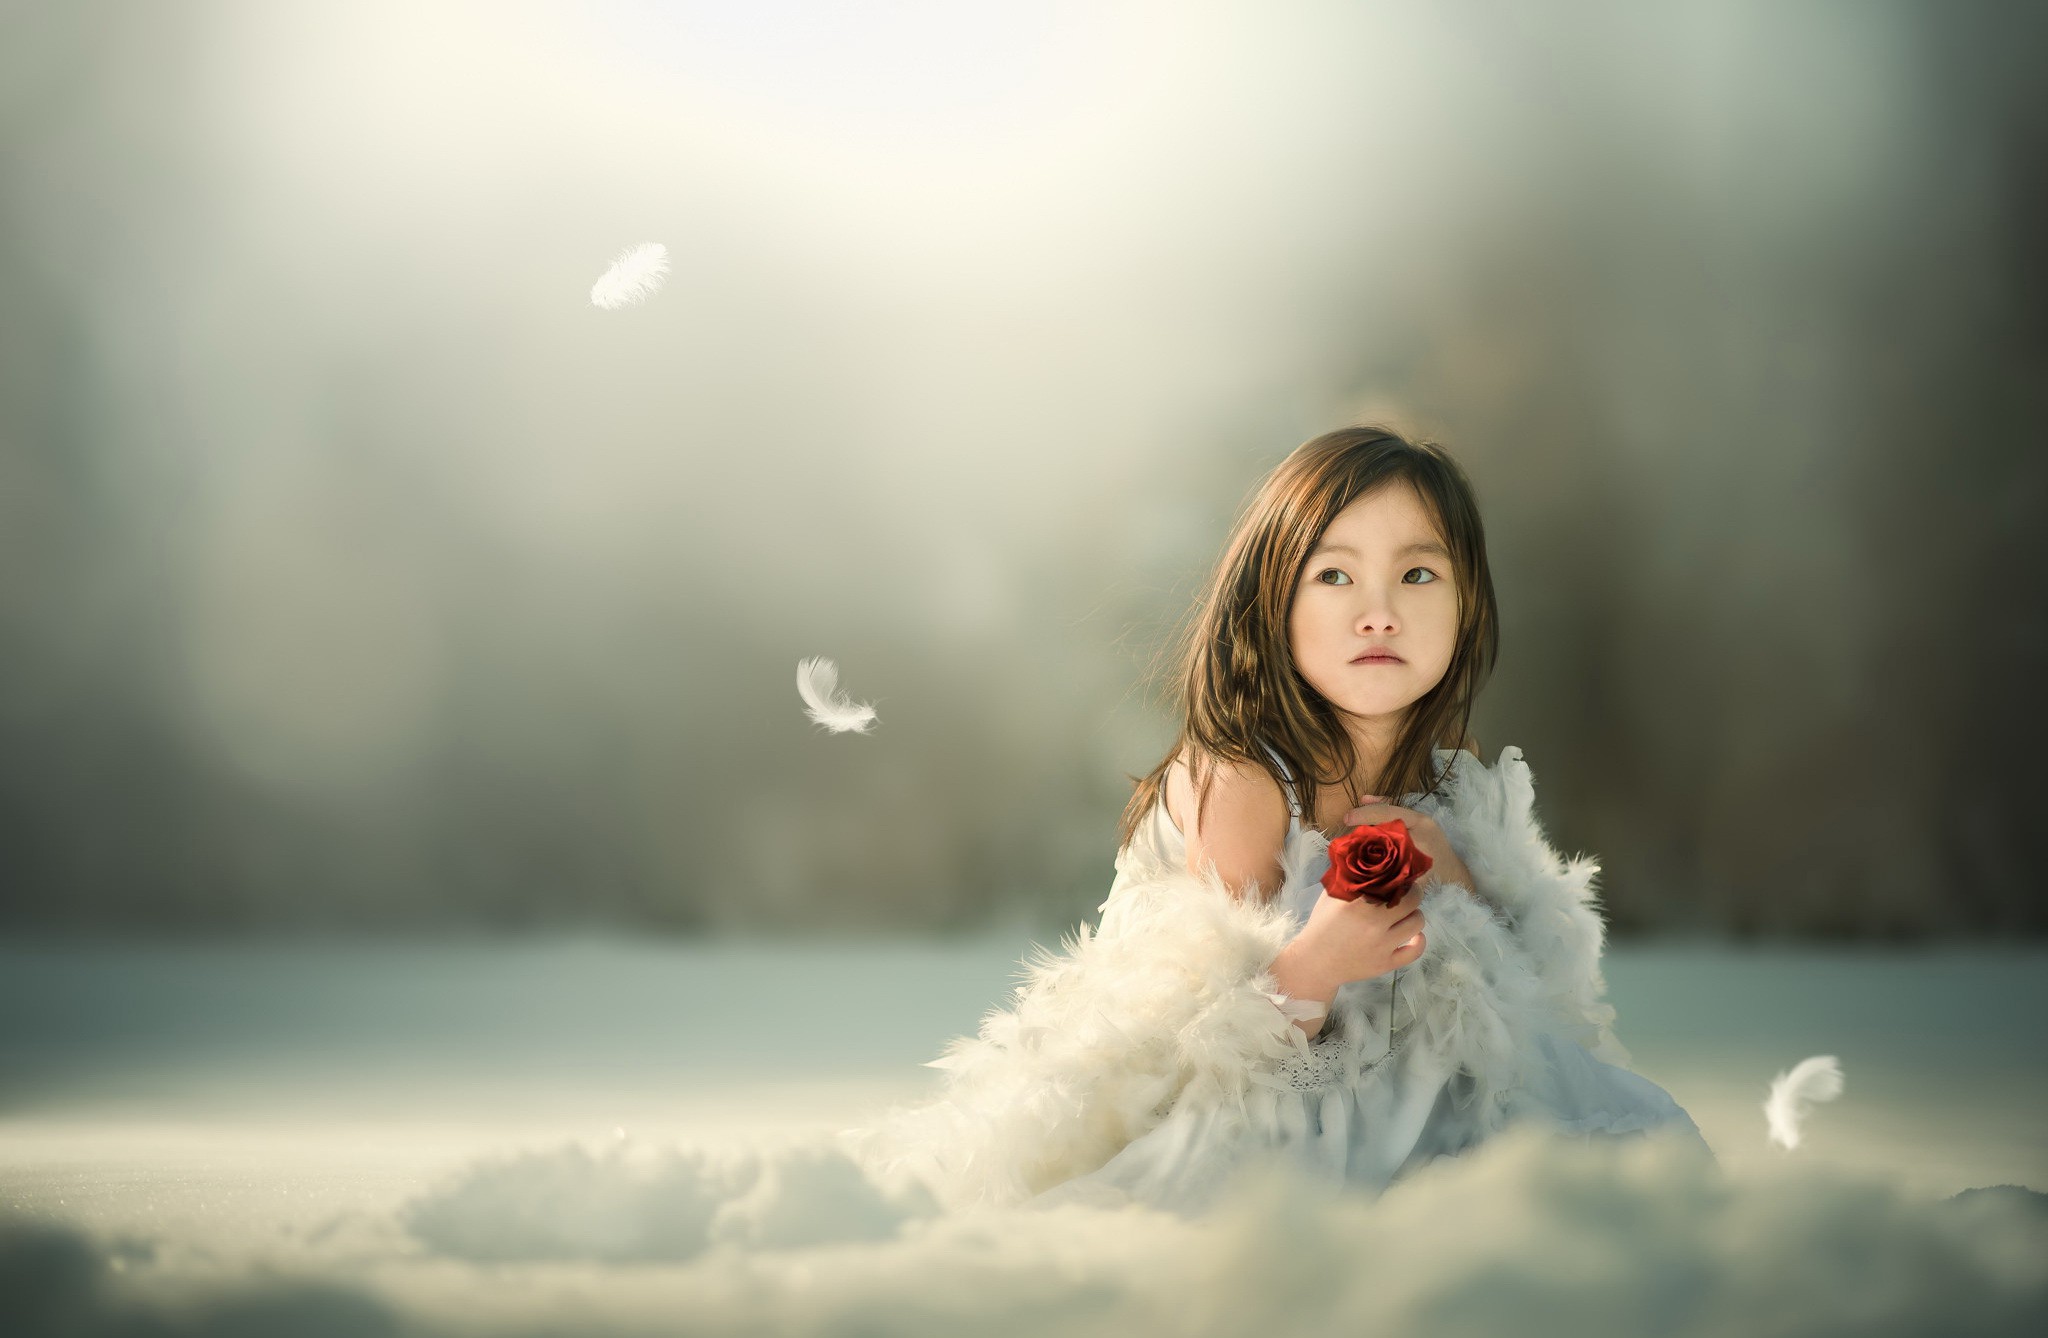 Cute Girl With Rose Background Free Awesome Image For Mobile